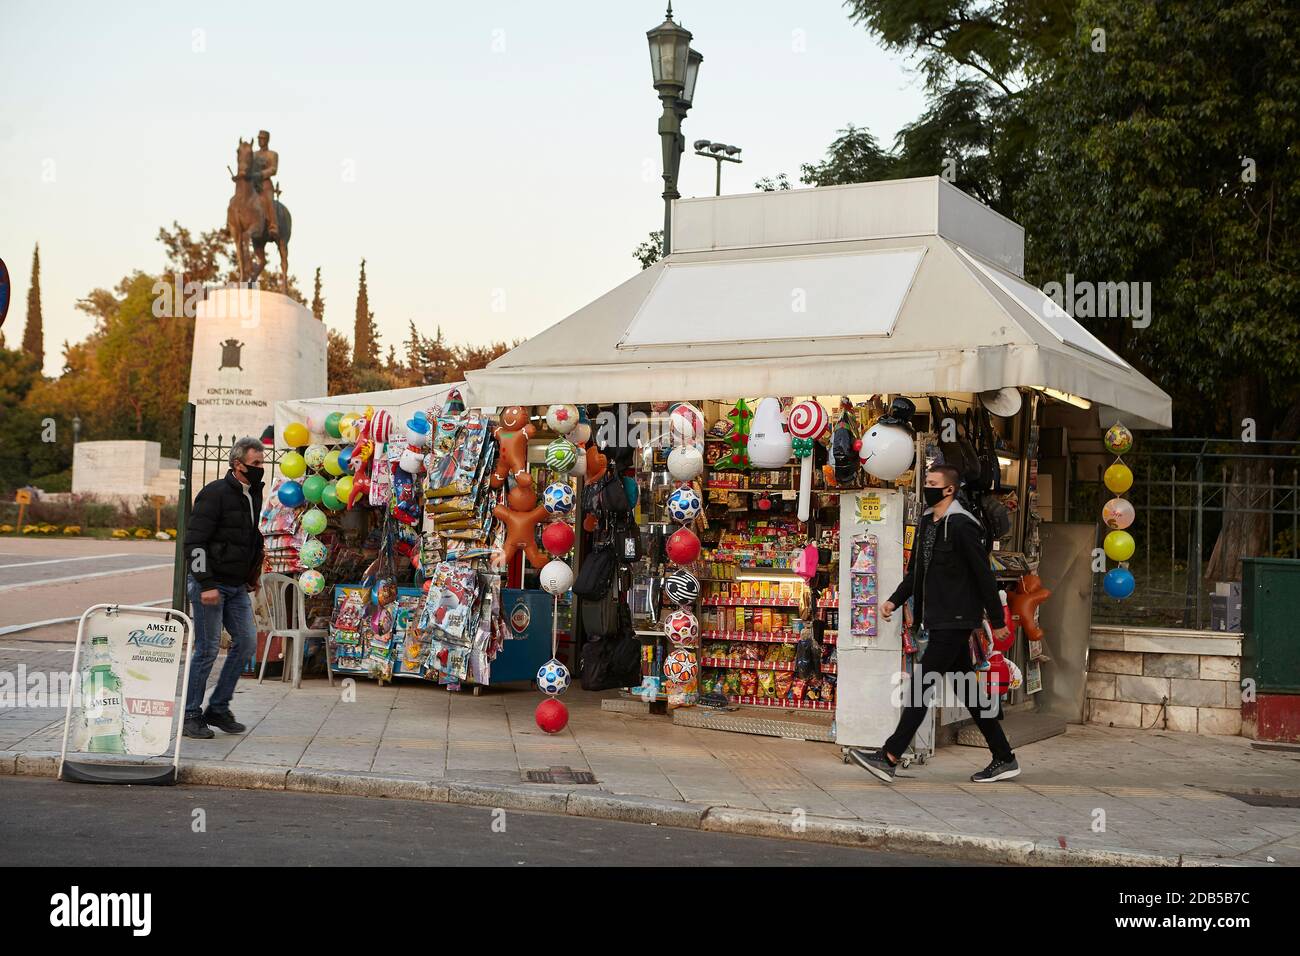 Periptero traditional street kiosk in central Athens Greece Stock Photo